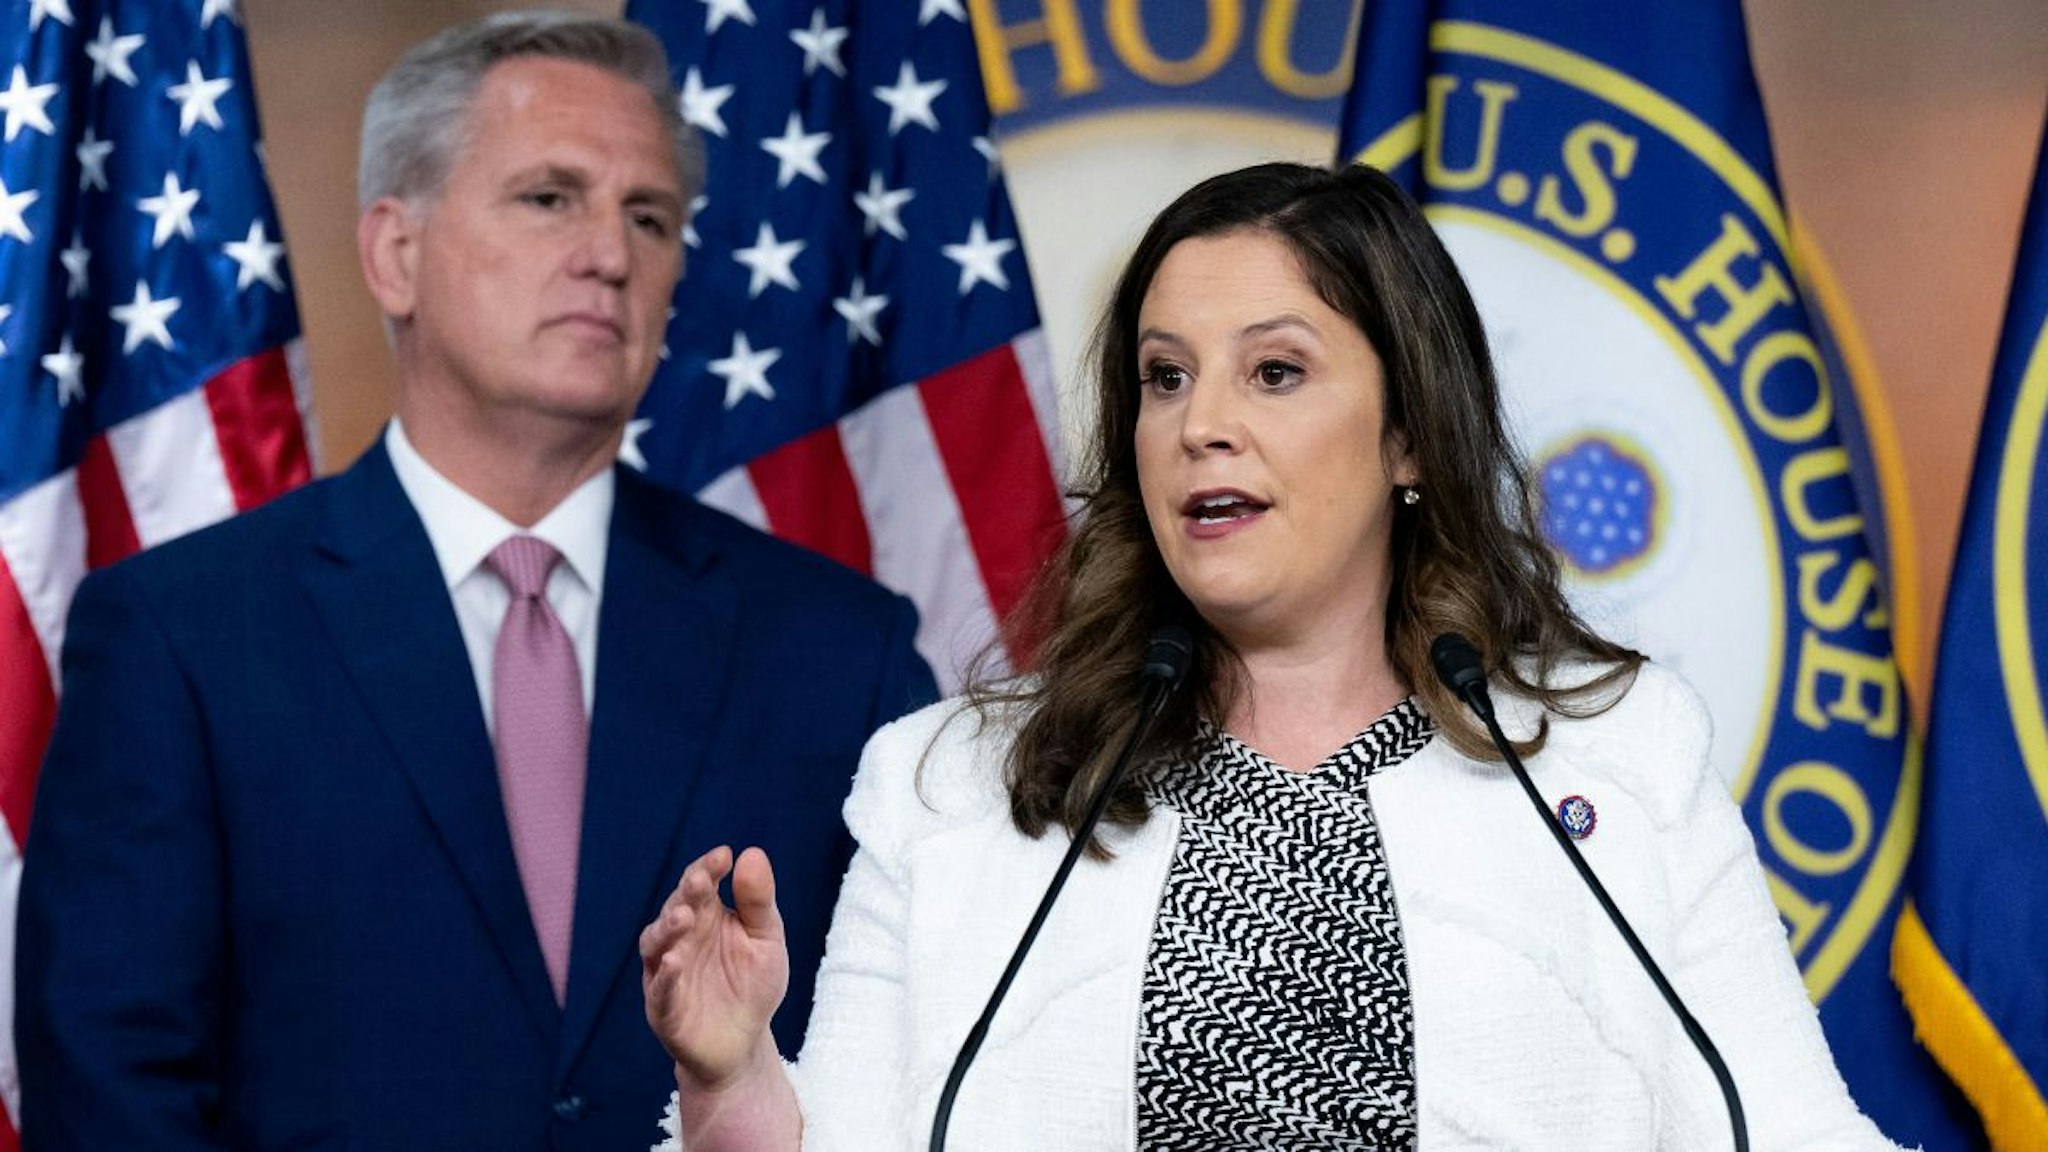 House Minority Leader Kevin McCarthy, Republican of California, and Representative Elise Stefanik (R), Republican of New York and chair of the House Republican Conference, holds a press conference on Capitol Hill in Washington, DC, June 9, 2022.